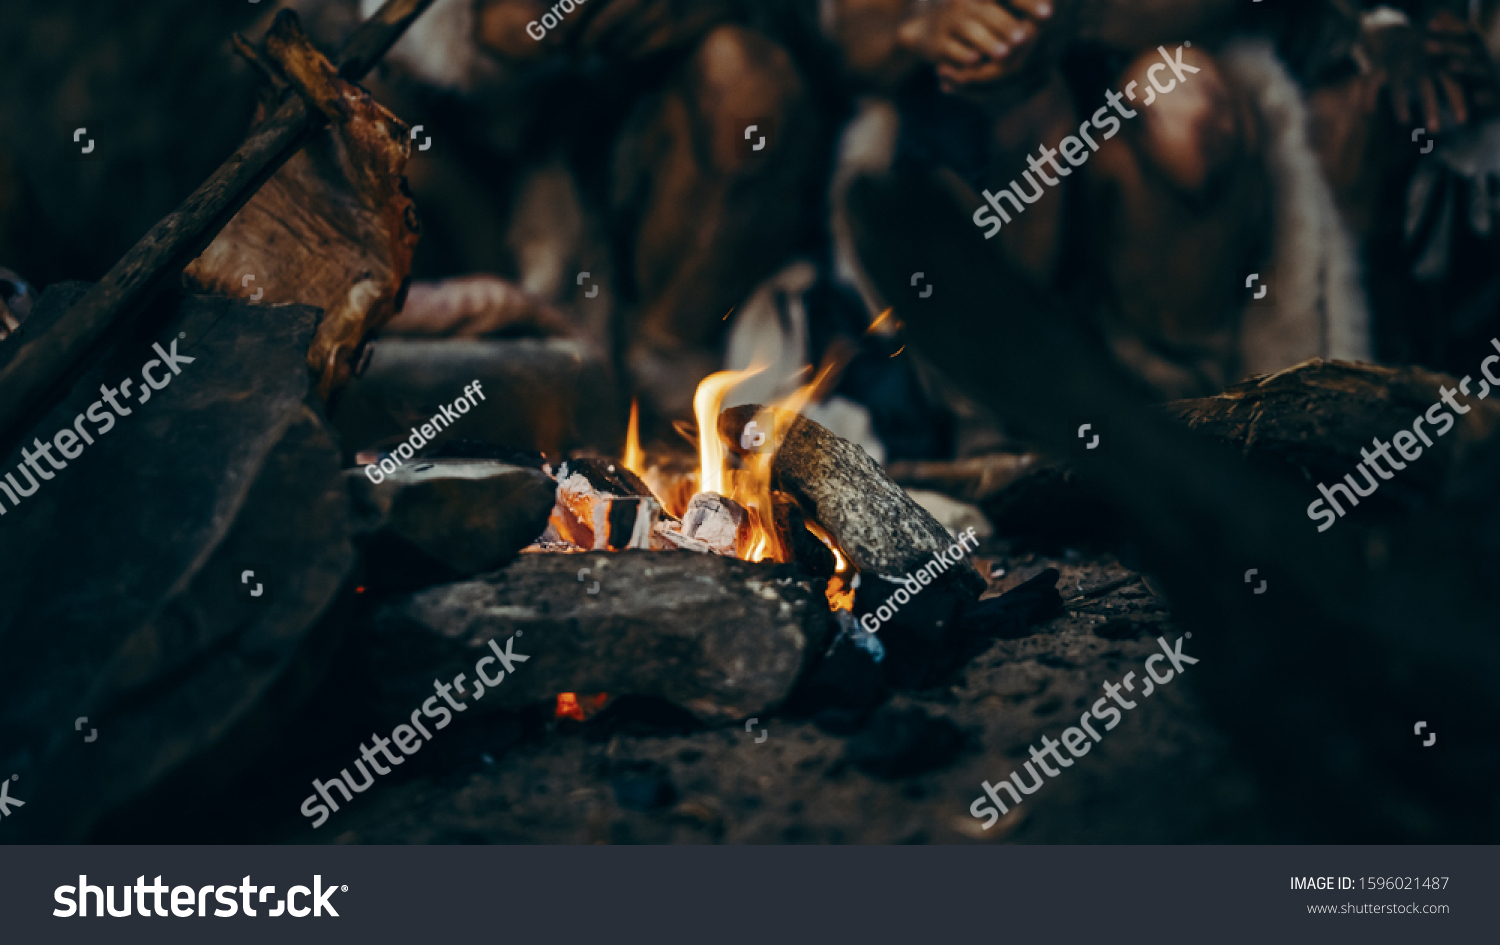 Close-up of Tribe Prehistoric Hunter-Gatherers Trying to Get Warm at the Bonfire, Holding Hands over Fire, Cooking Food. Neanderthal or Homo Sapiens Family Live in Cave at Night. #1596021487